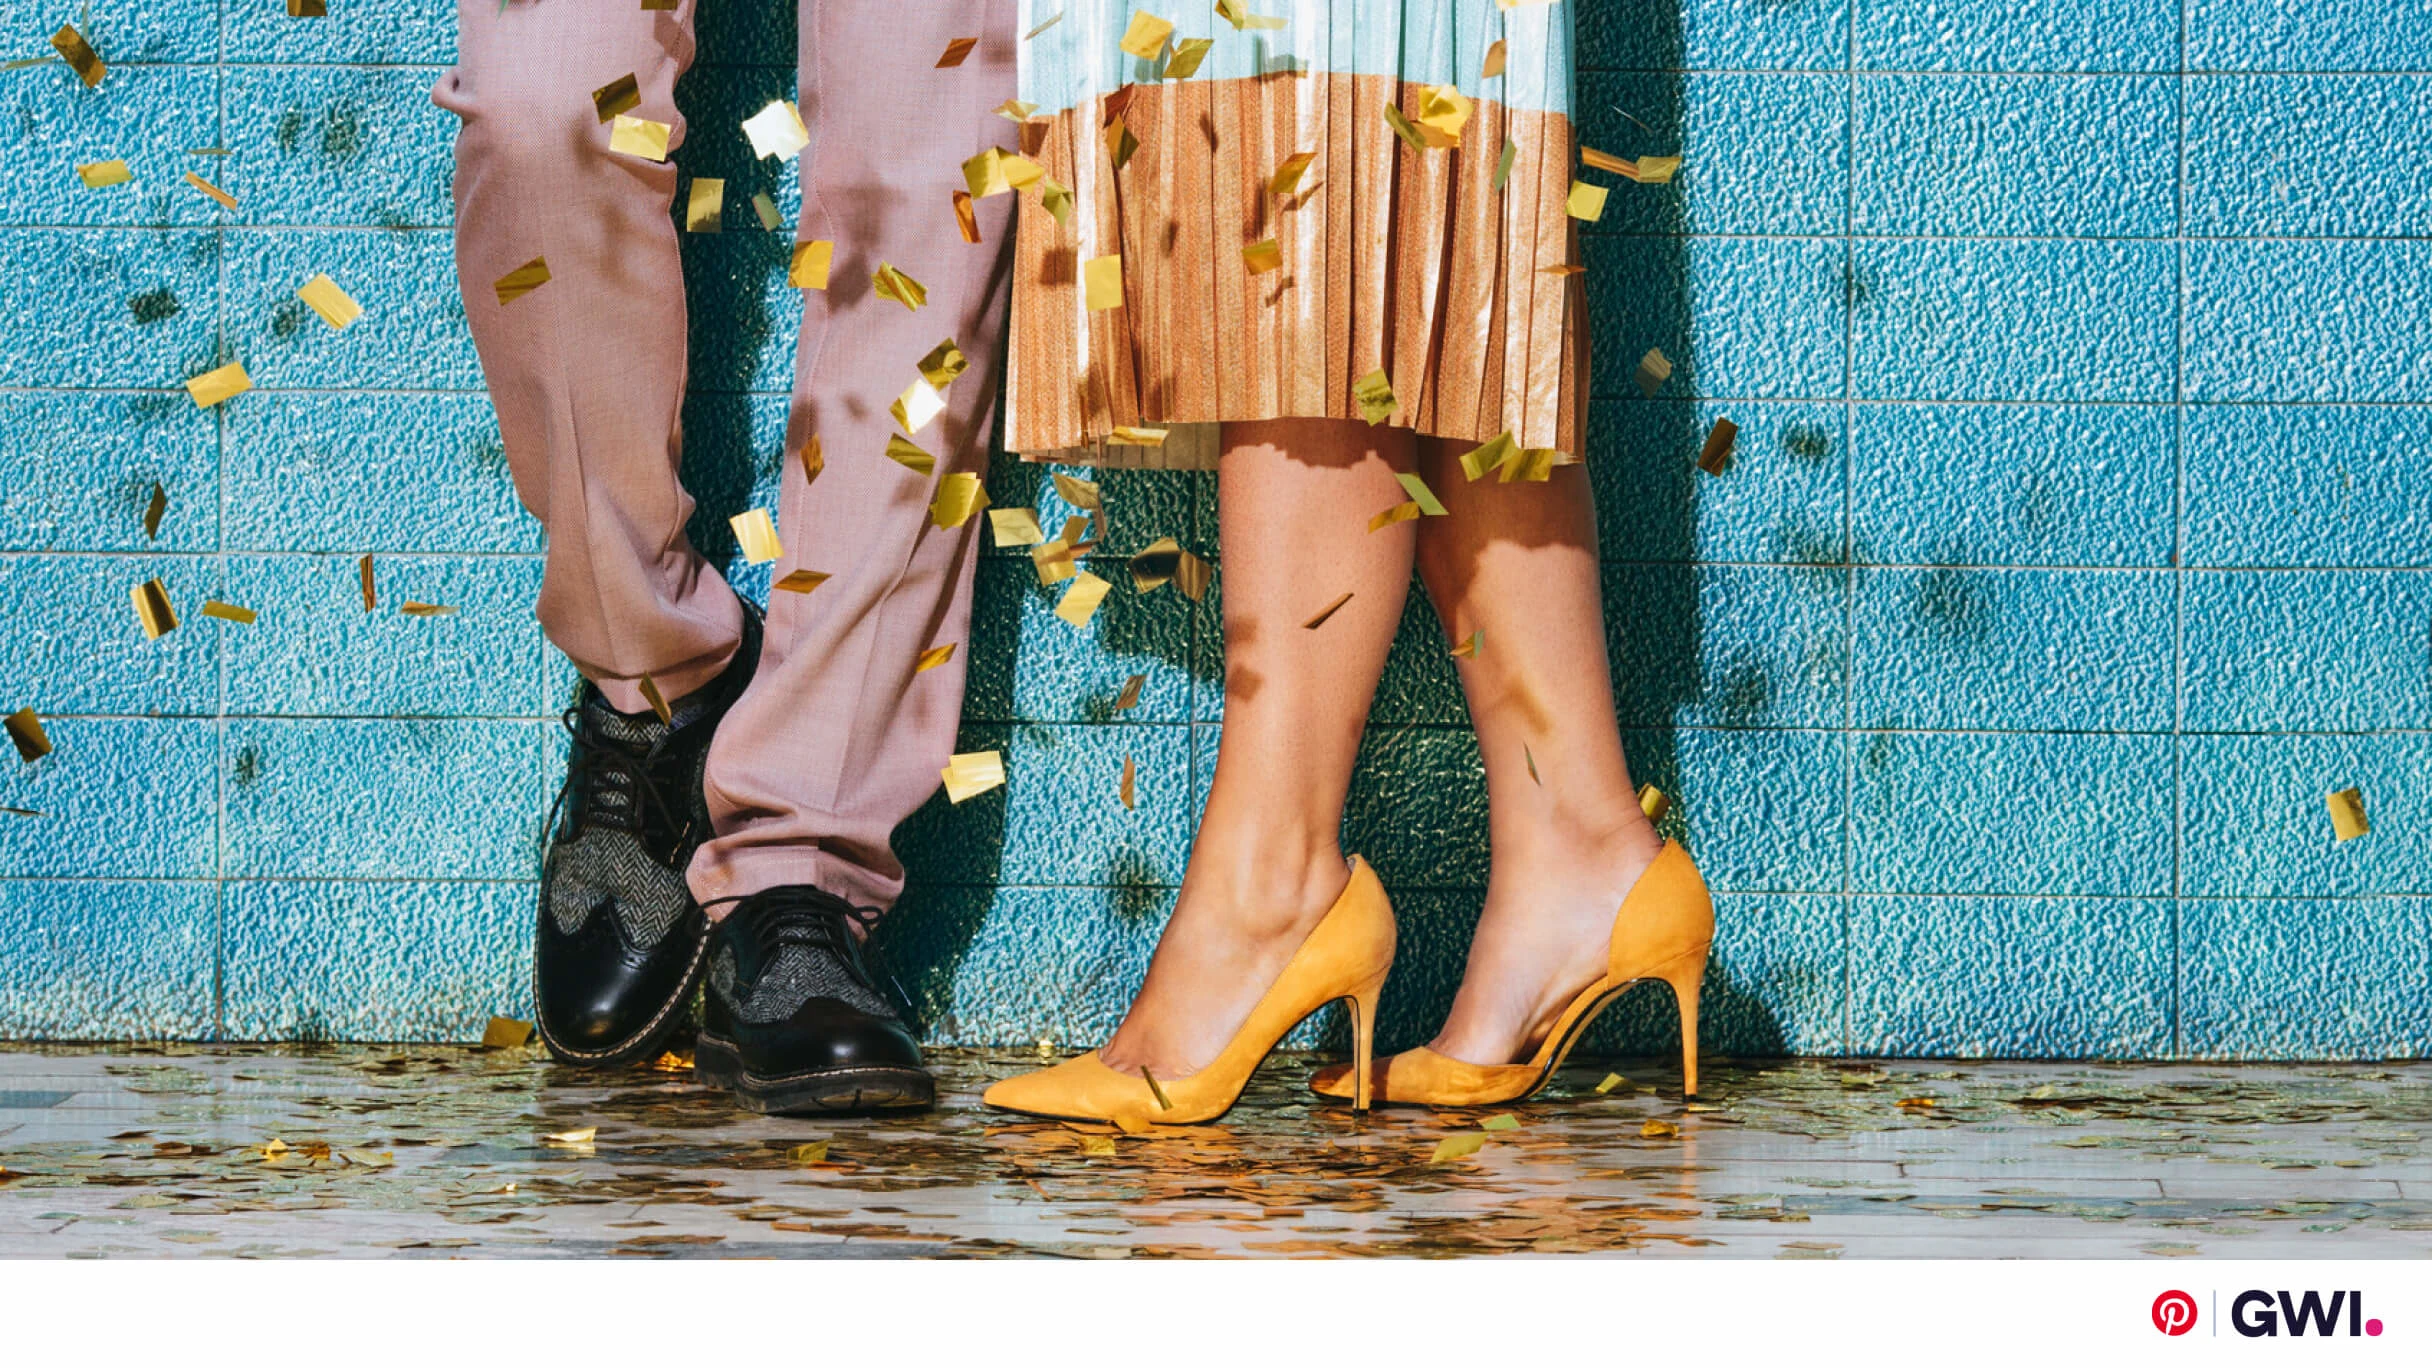 Legs of two people standing next to each other against a blue wall, surrounded by confetti. The person on the left is wearing salmon-colour trousers and black dress shoes. The person on the right is wearing a two-tone skirt and yellow heels.